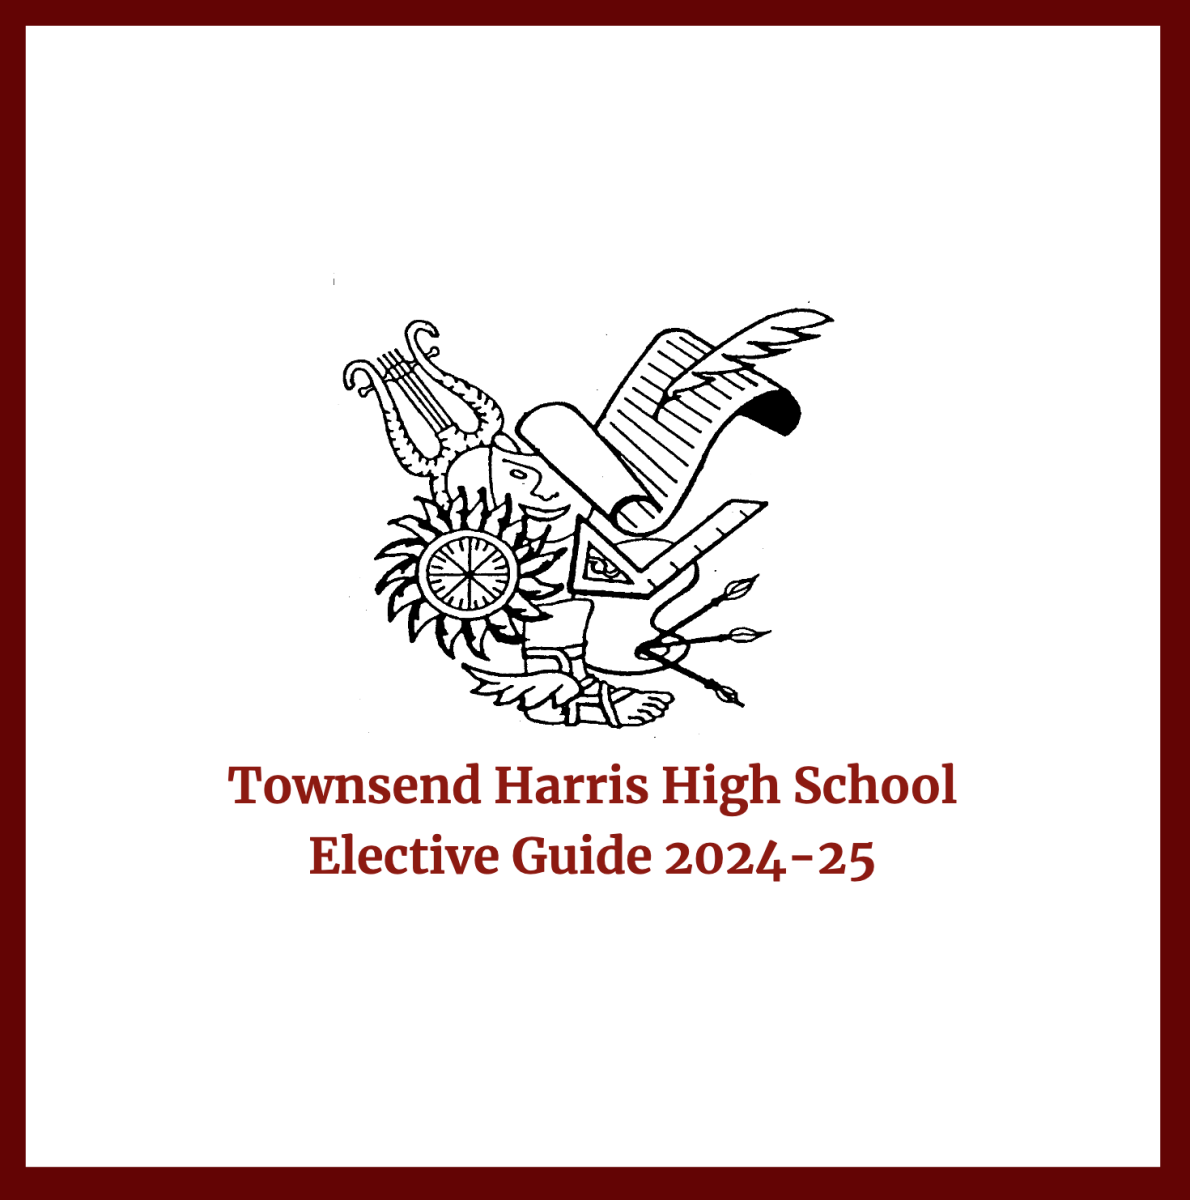 The elective course guide that all students received on Friday.